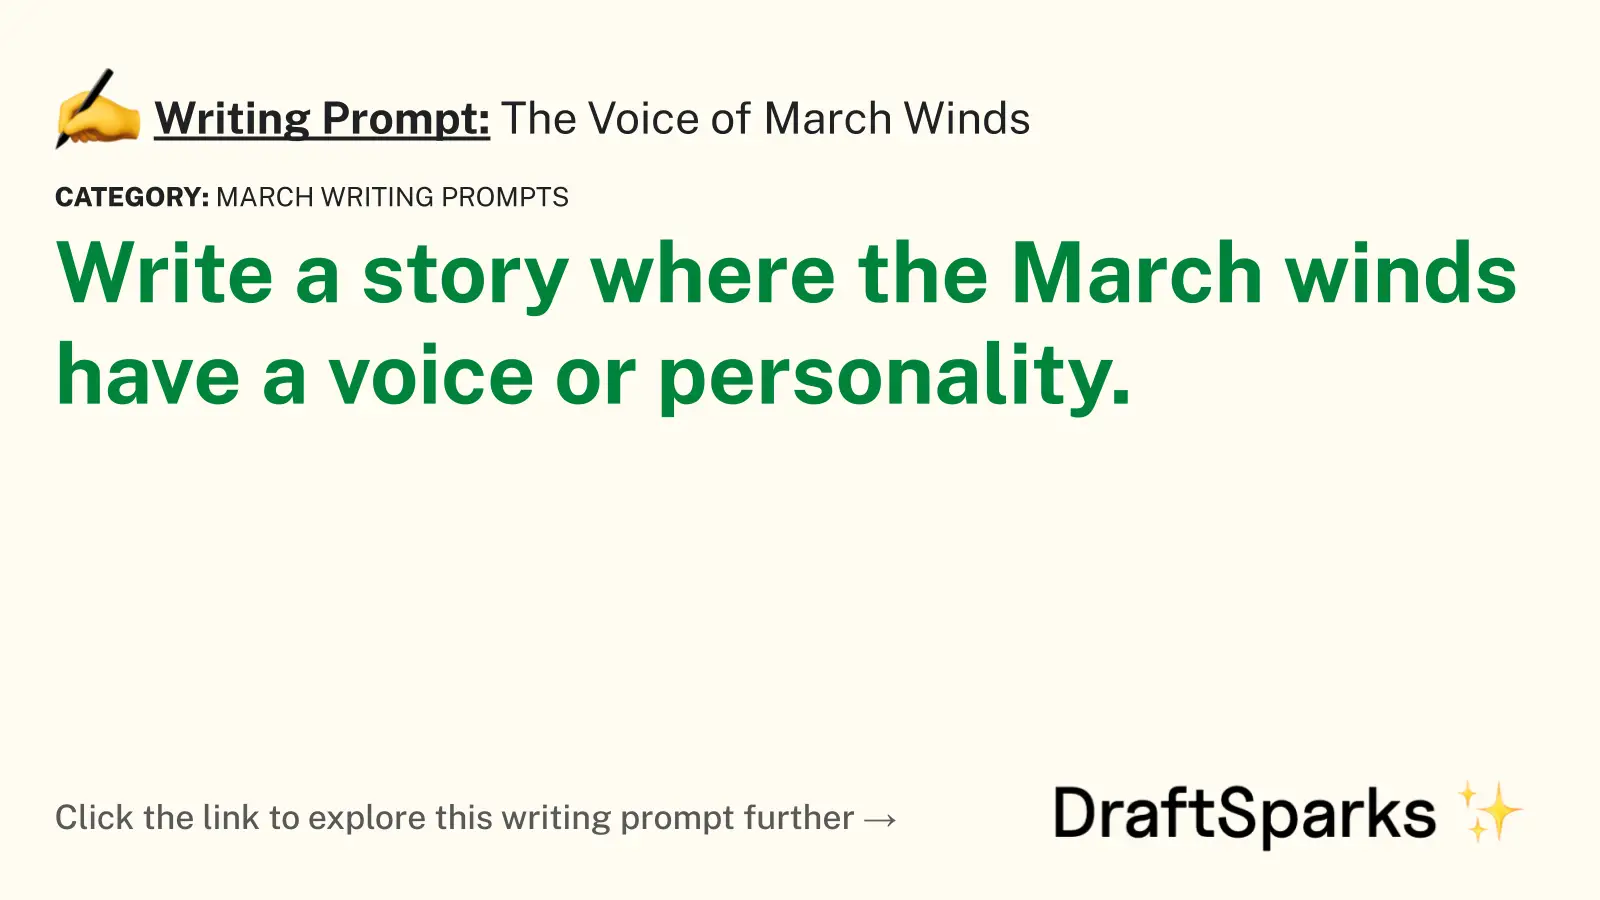 The Voice of March Winds